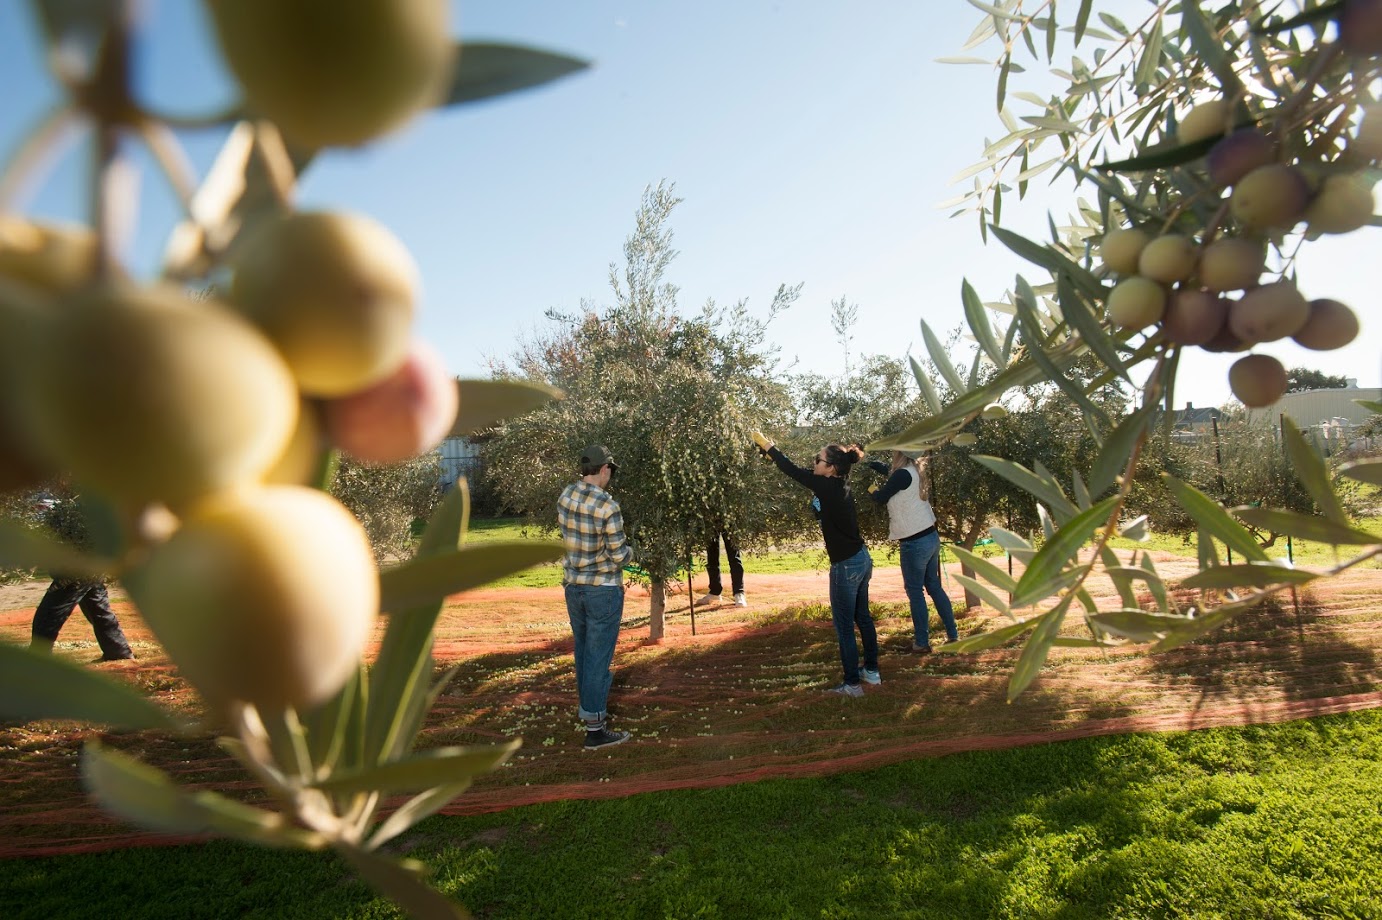 Students harvest olives by hand from young trees in the campus research grove. (Gregory Urquiaga/UC Davis)